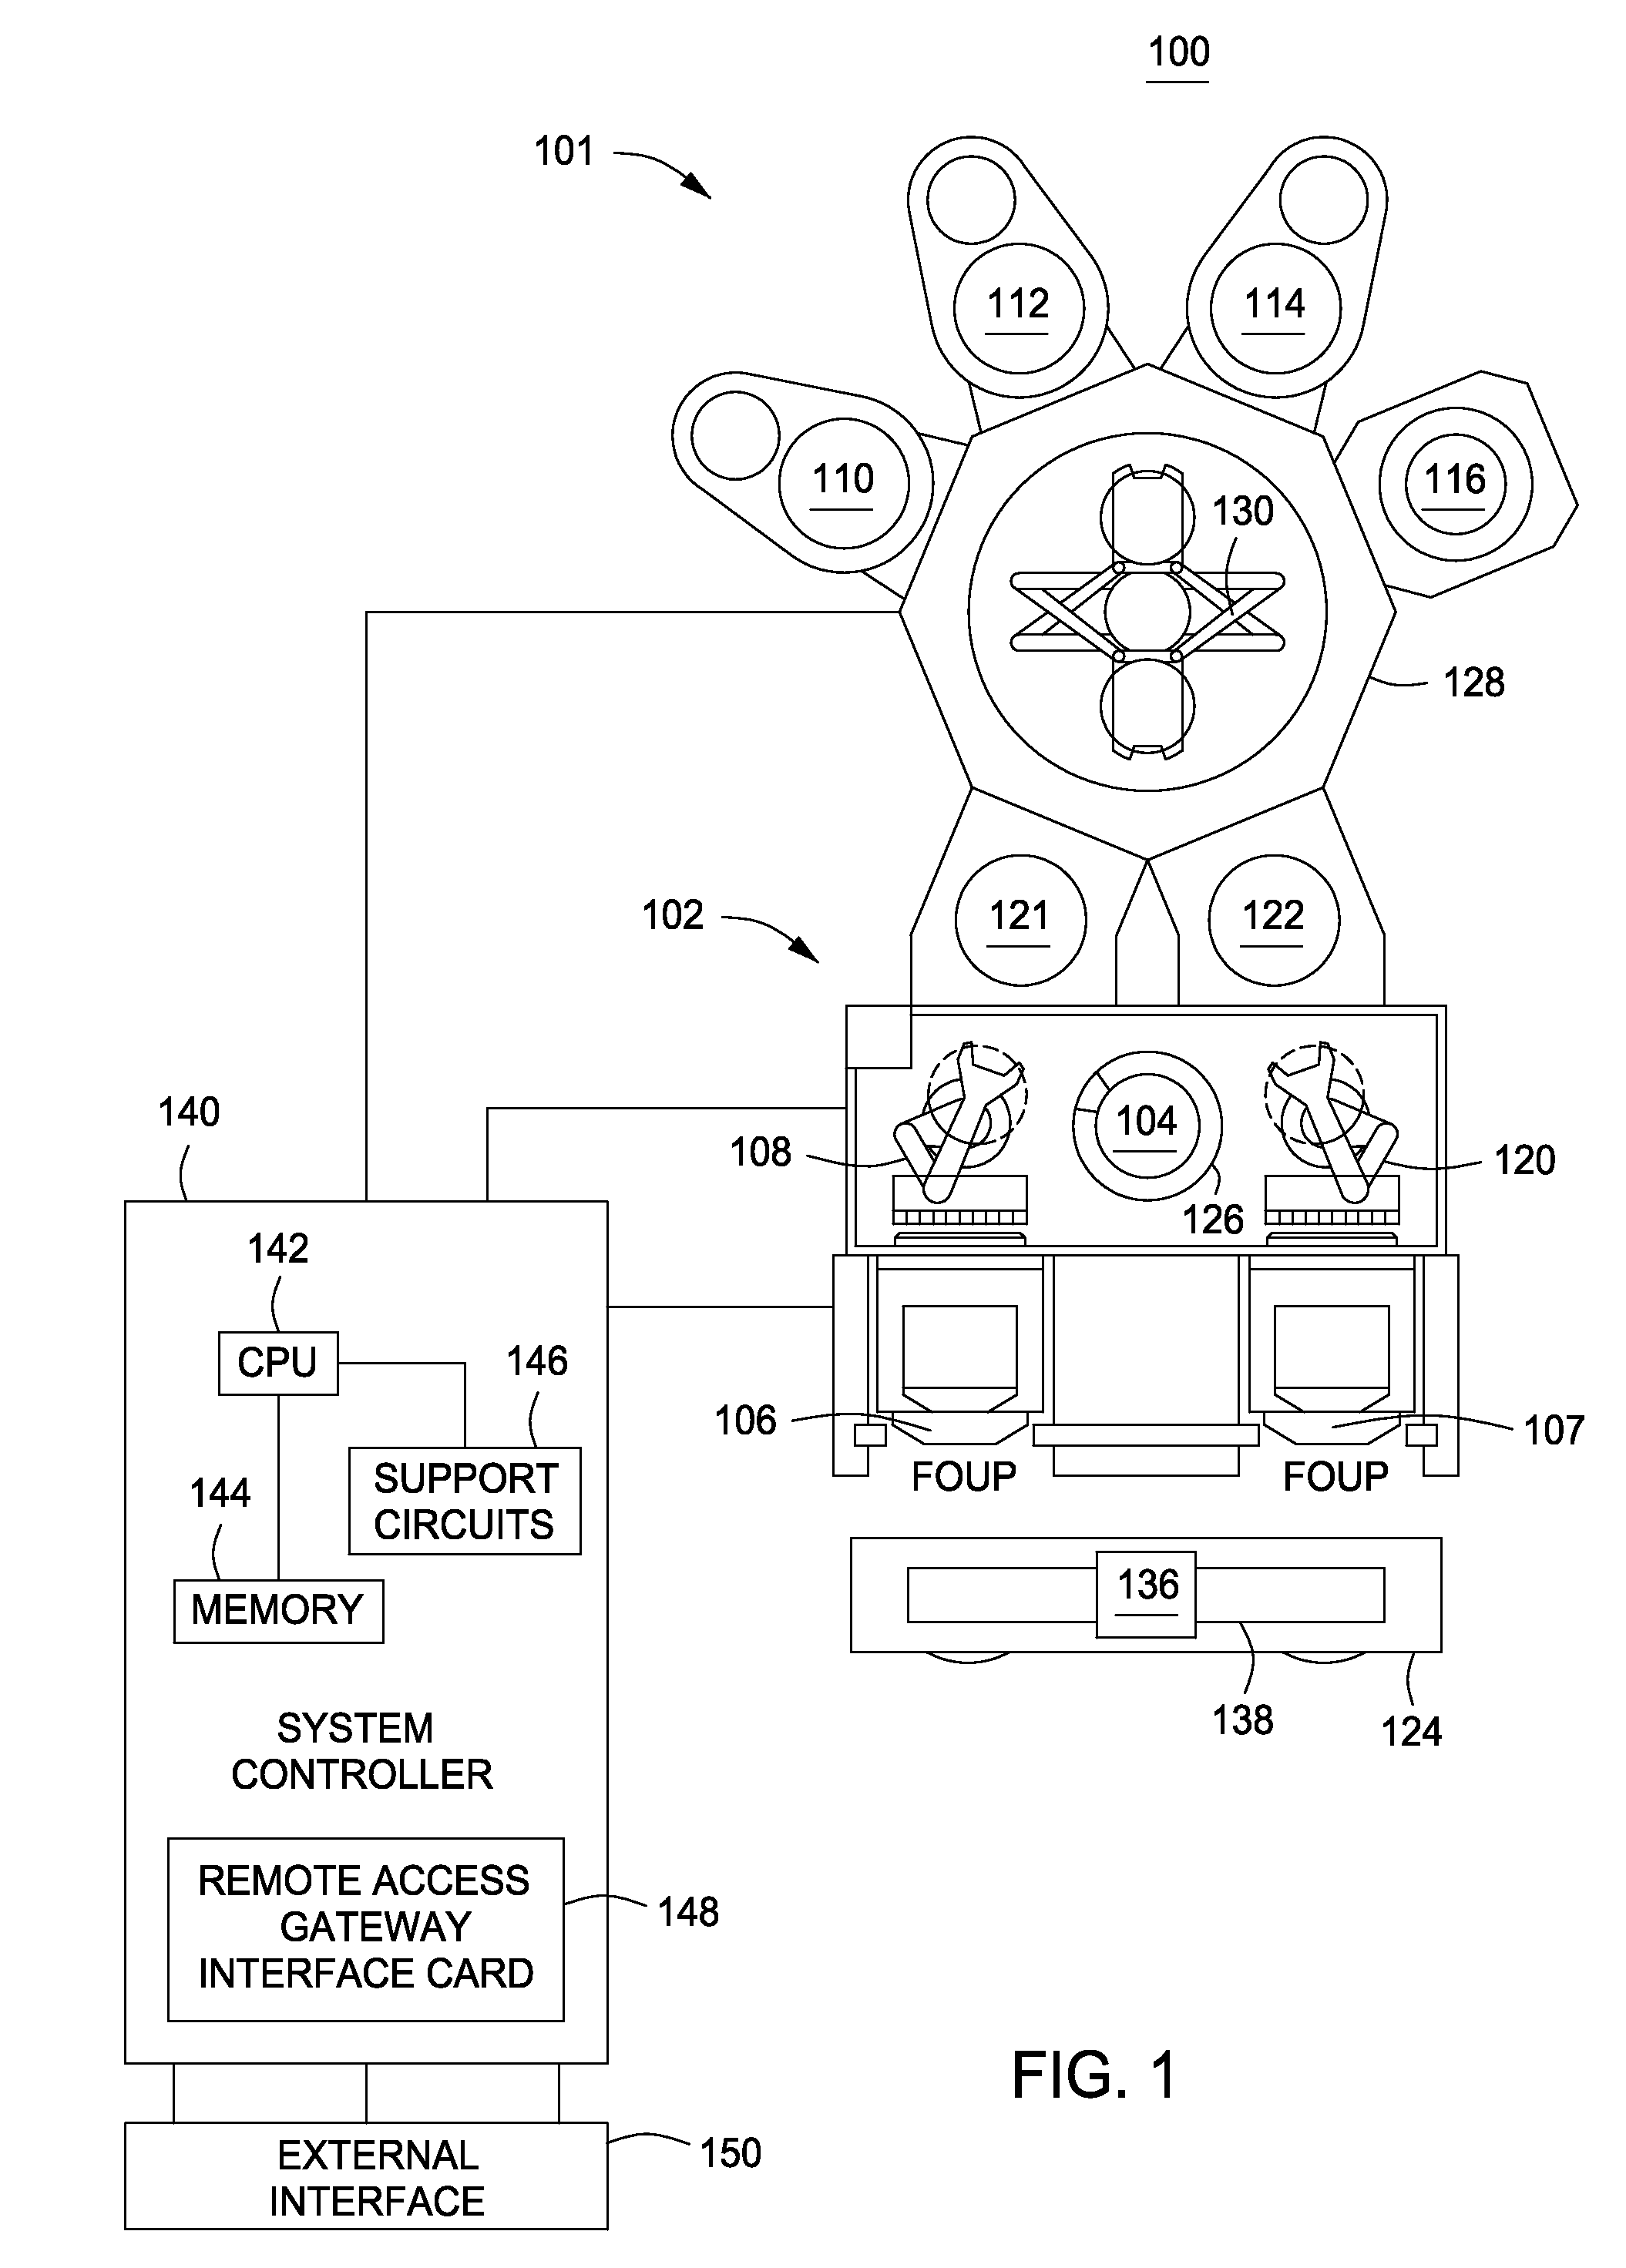 Remote access gateway for semiconductor processing equipment